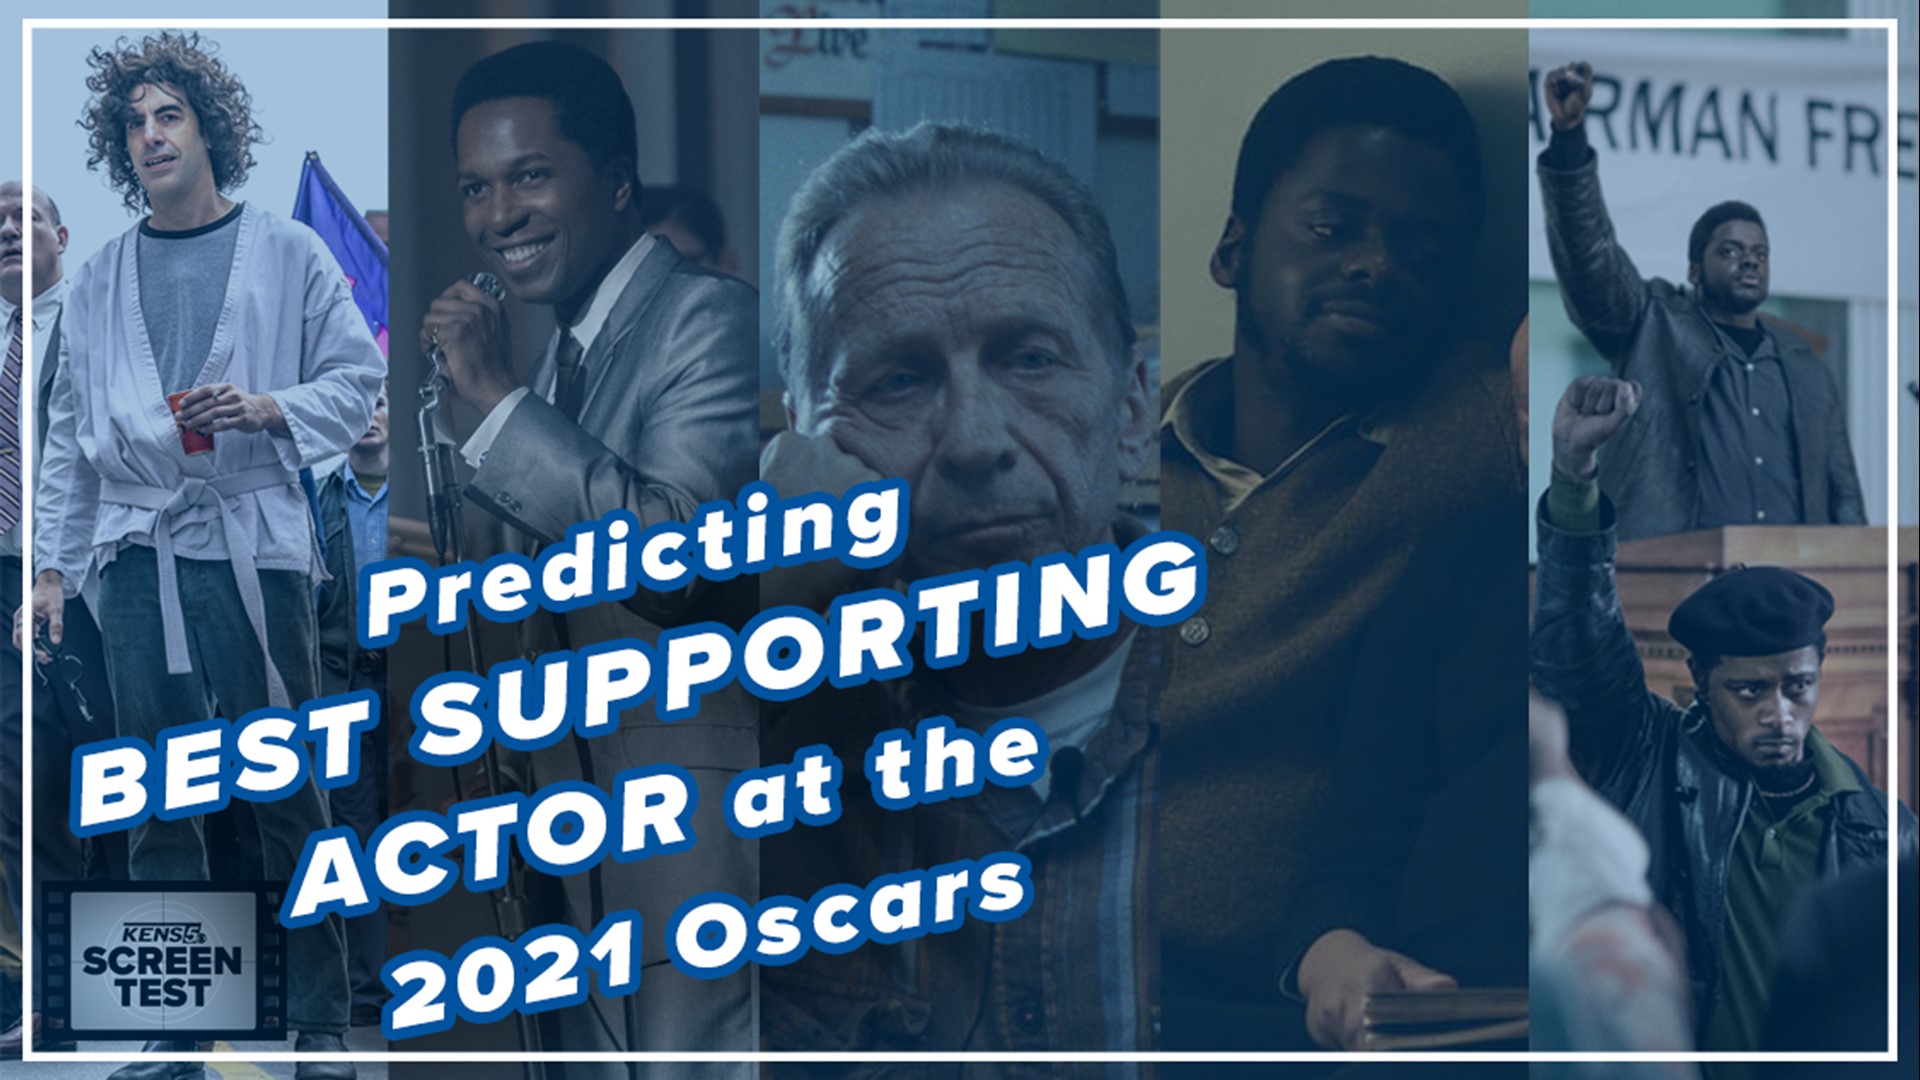 Established stars, previous unknowns and multitalented performers are among the Best Supporting Actor field at the 2021 Academy Awards.